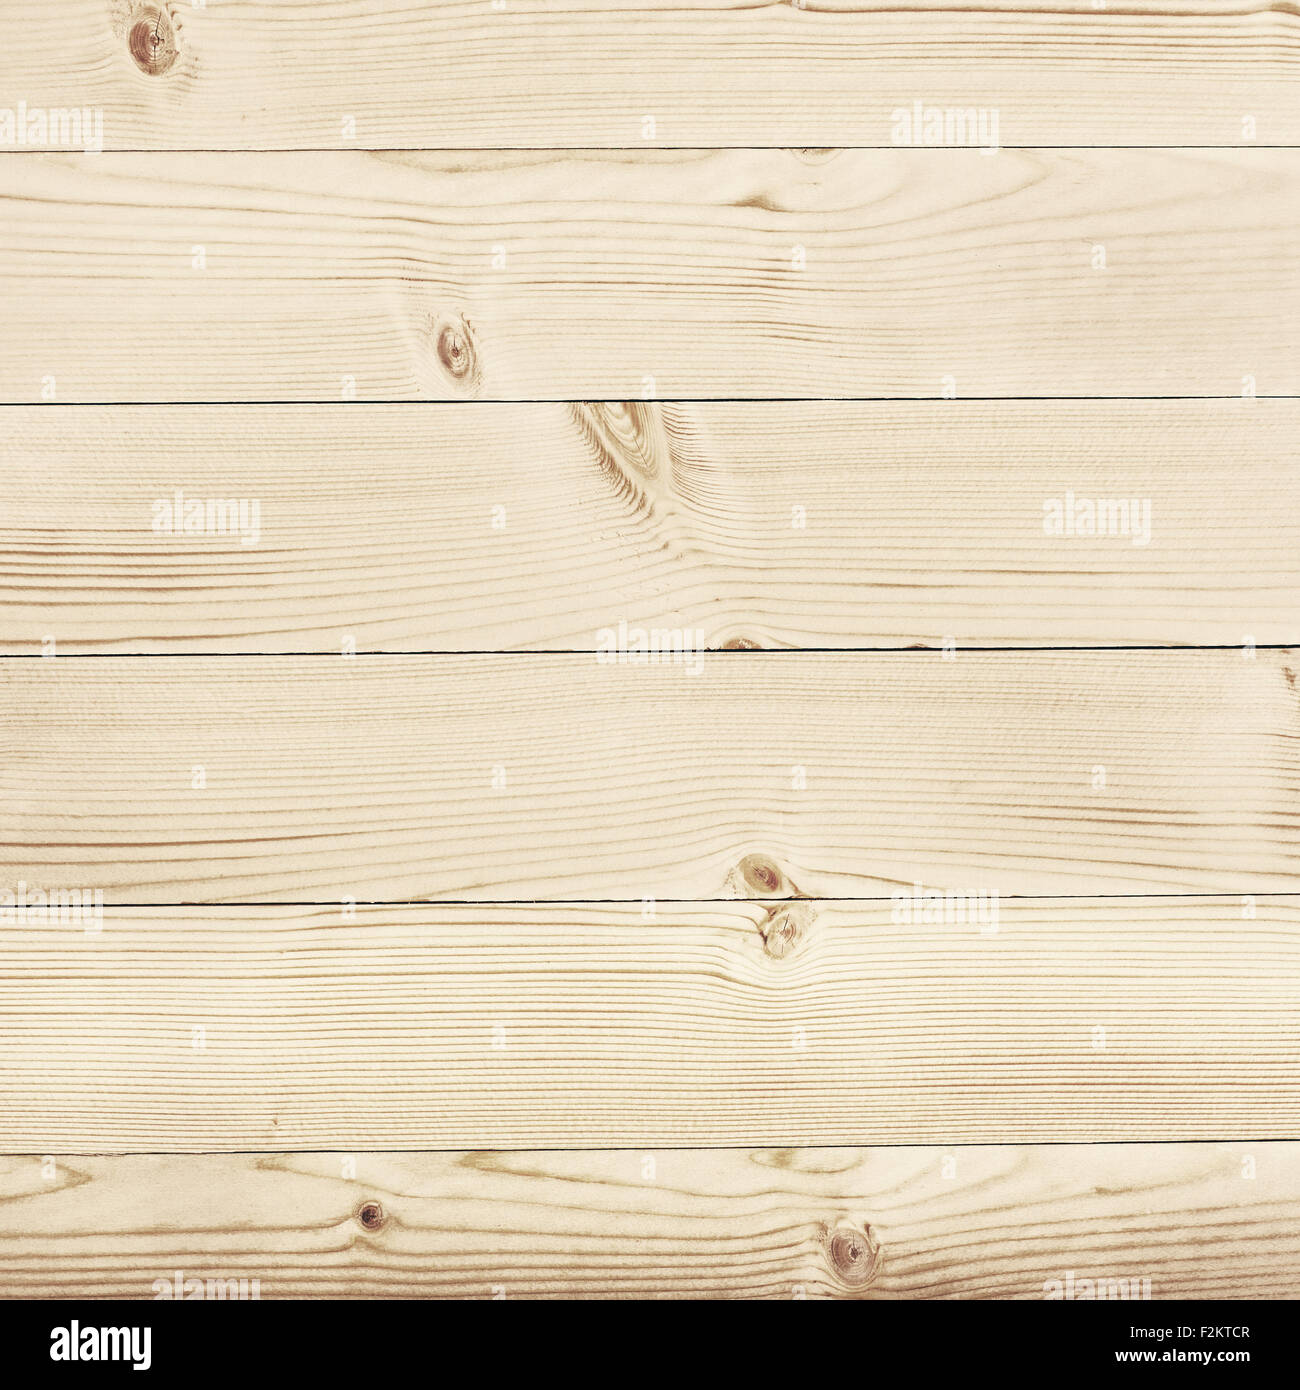 Light wooden texture with horizontal planks, table, desk or wall surface Stock Photo